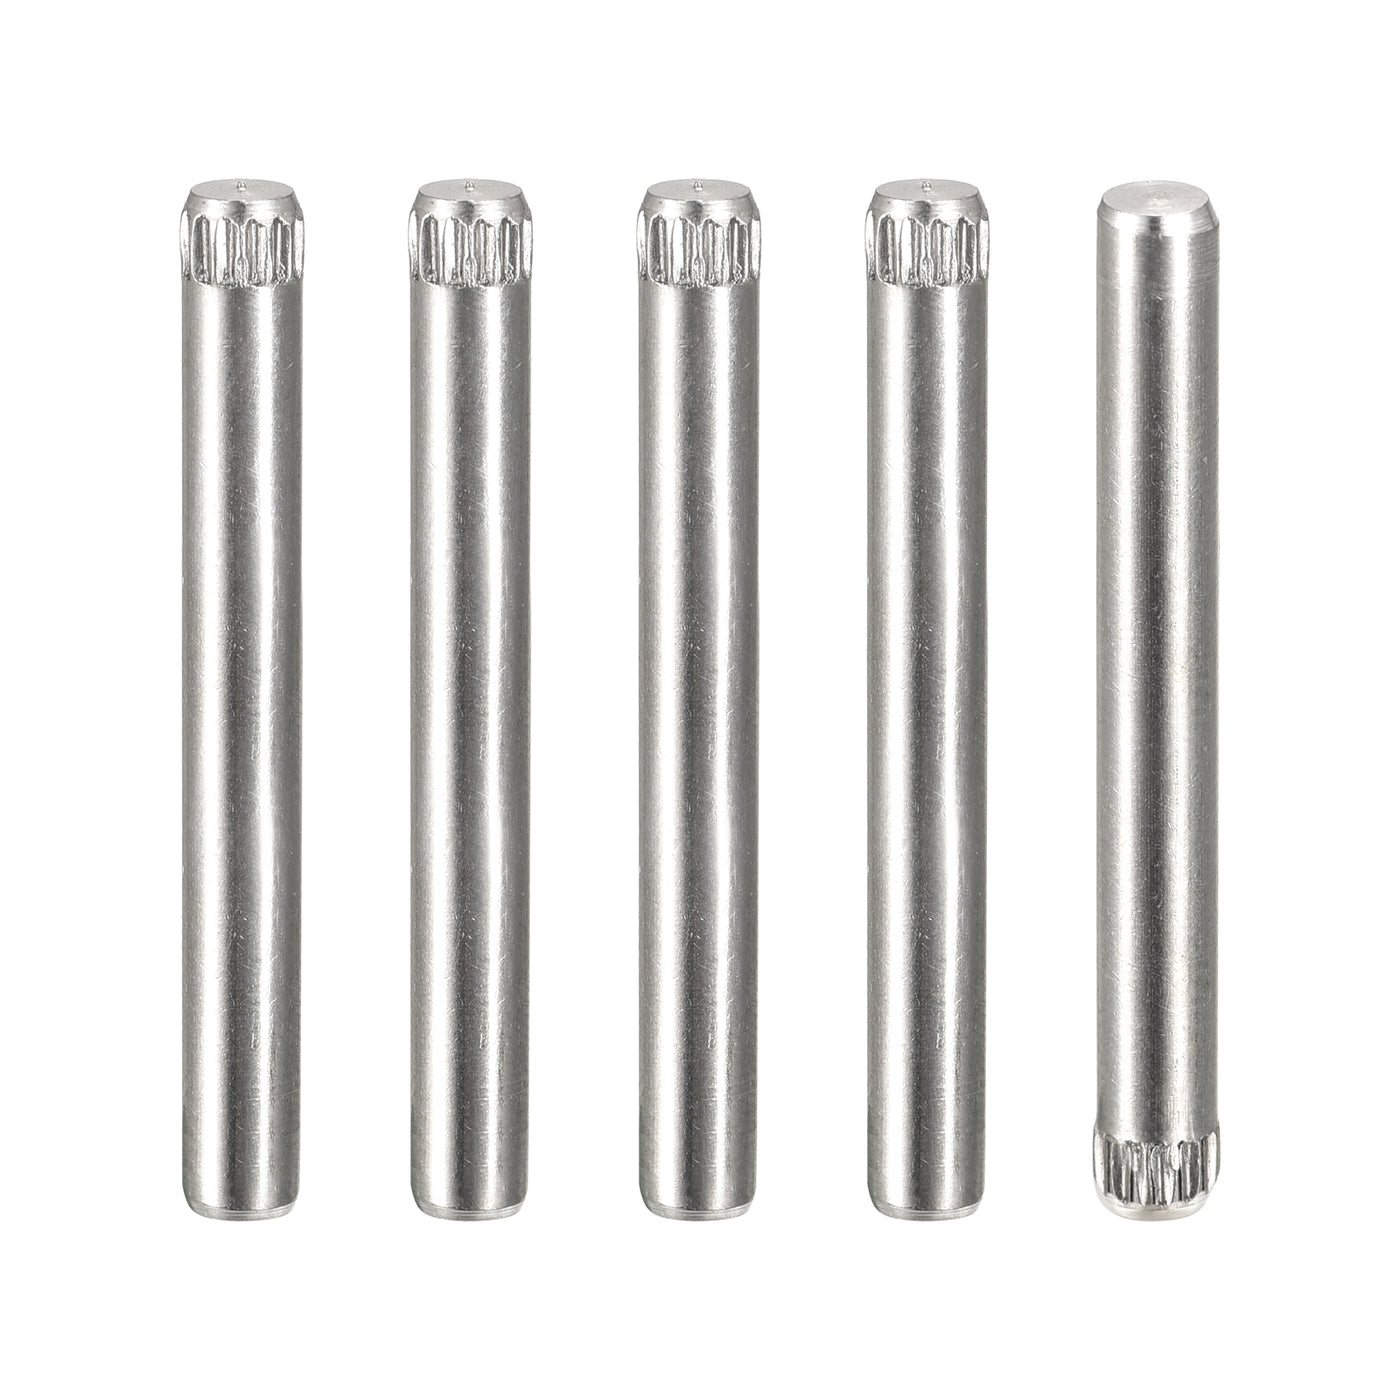 uxcell Uxcell 4x35mm 304 Stainless Steel Dowel Pins, 5Pcs Knurled Head Flat End Dowel Pin